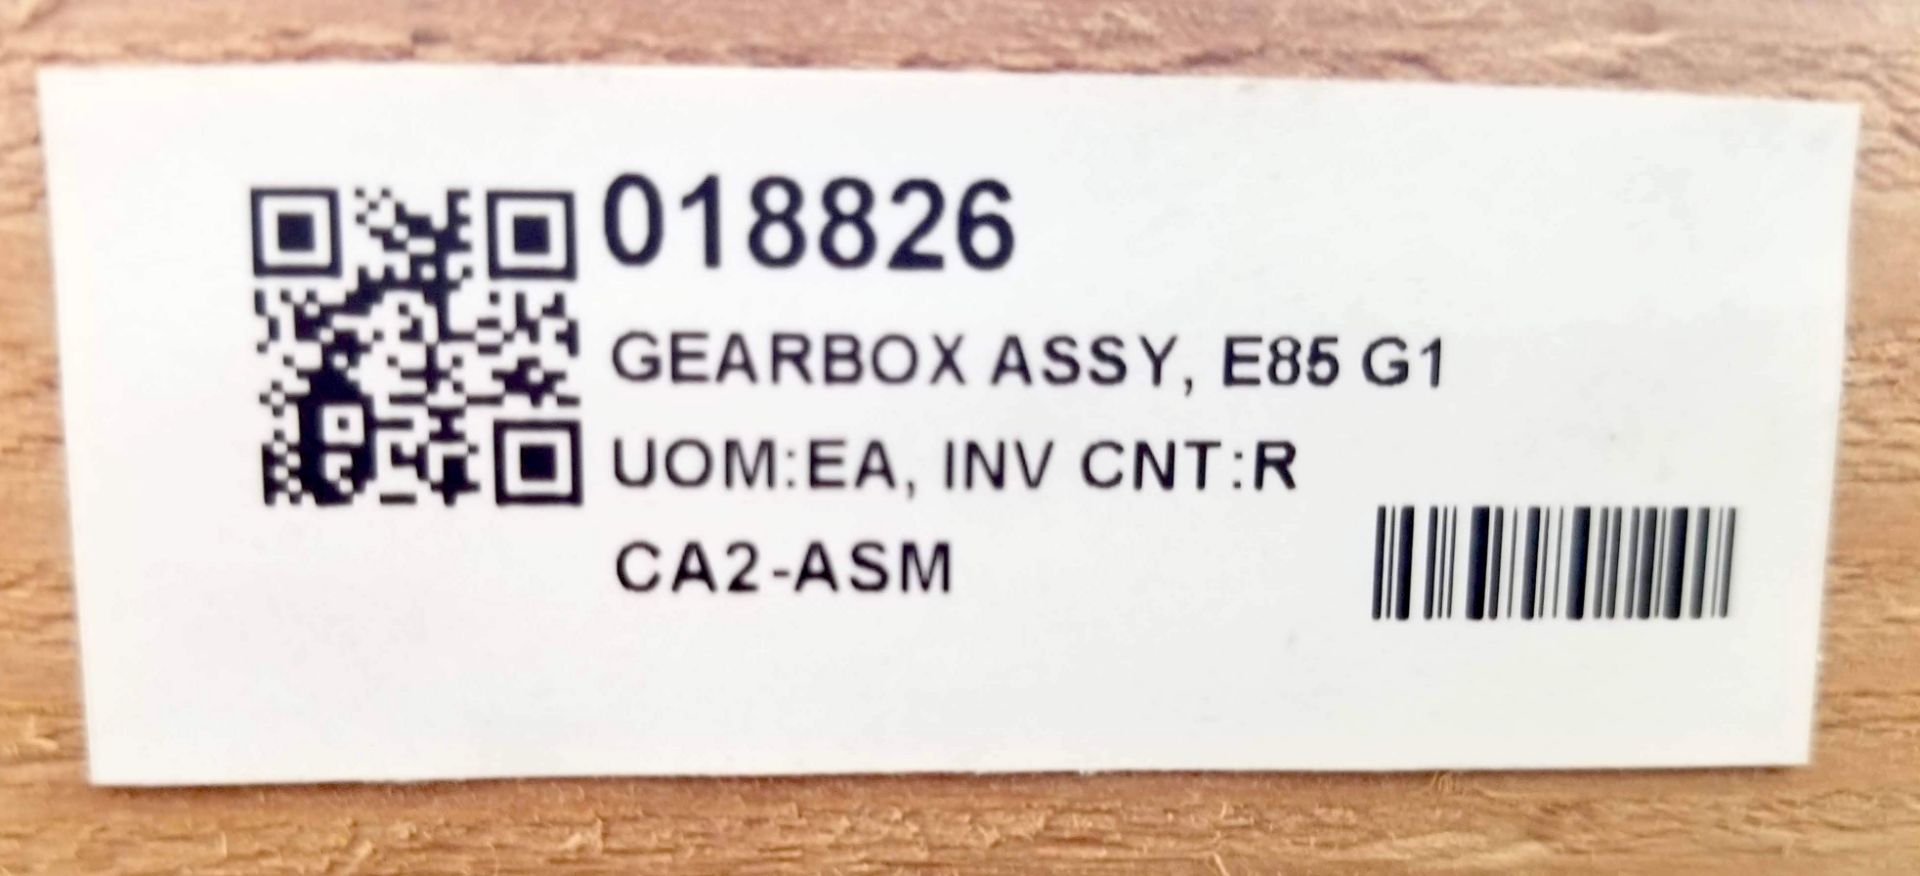 GEARBOX ASSY, E85 G1 - Image 3 of 7